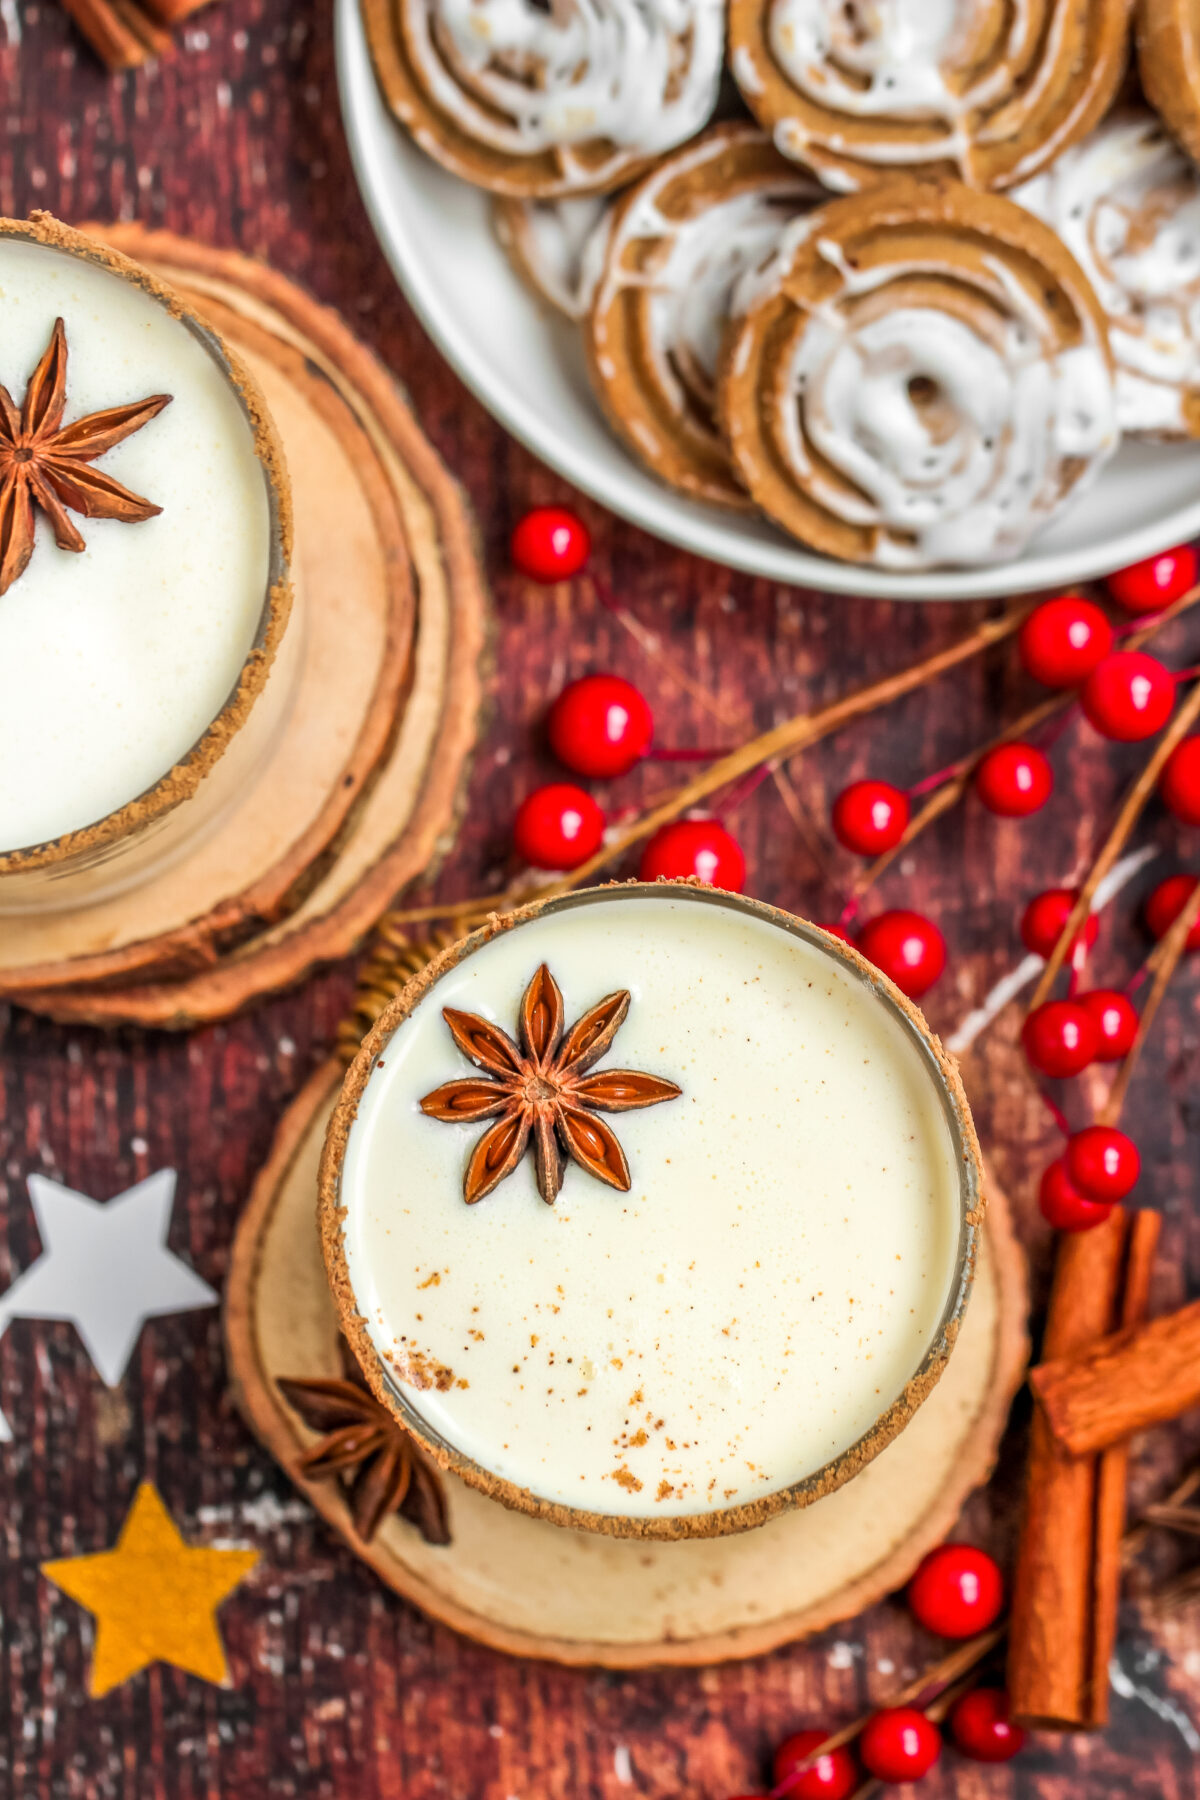 Looking for a great tasting homemade eggnog recipe? This one is rich and creamy and tastes better than the store-bought stuff!